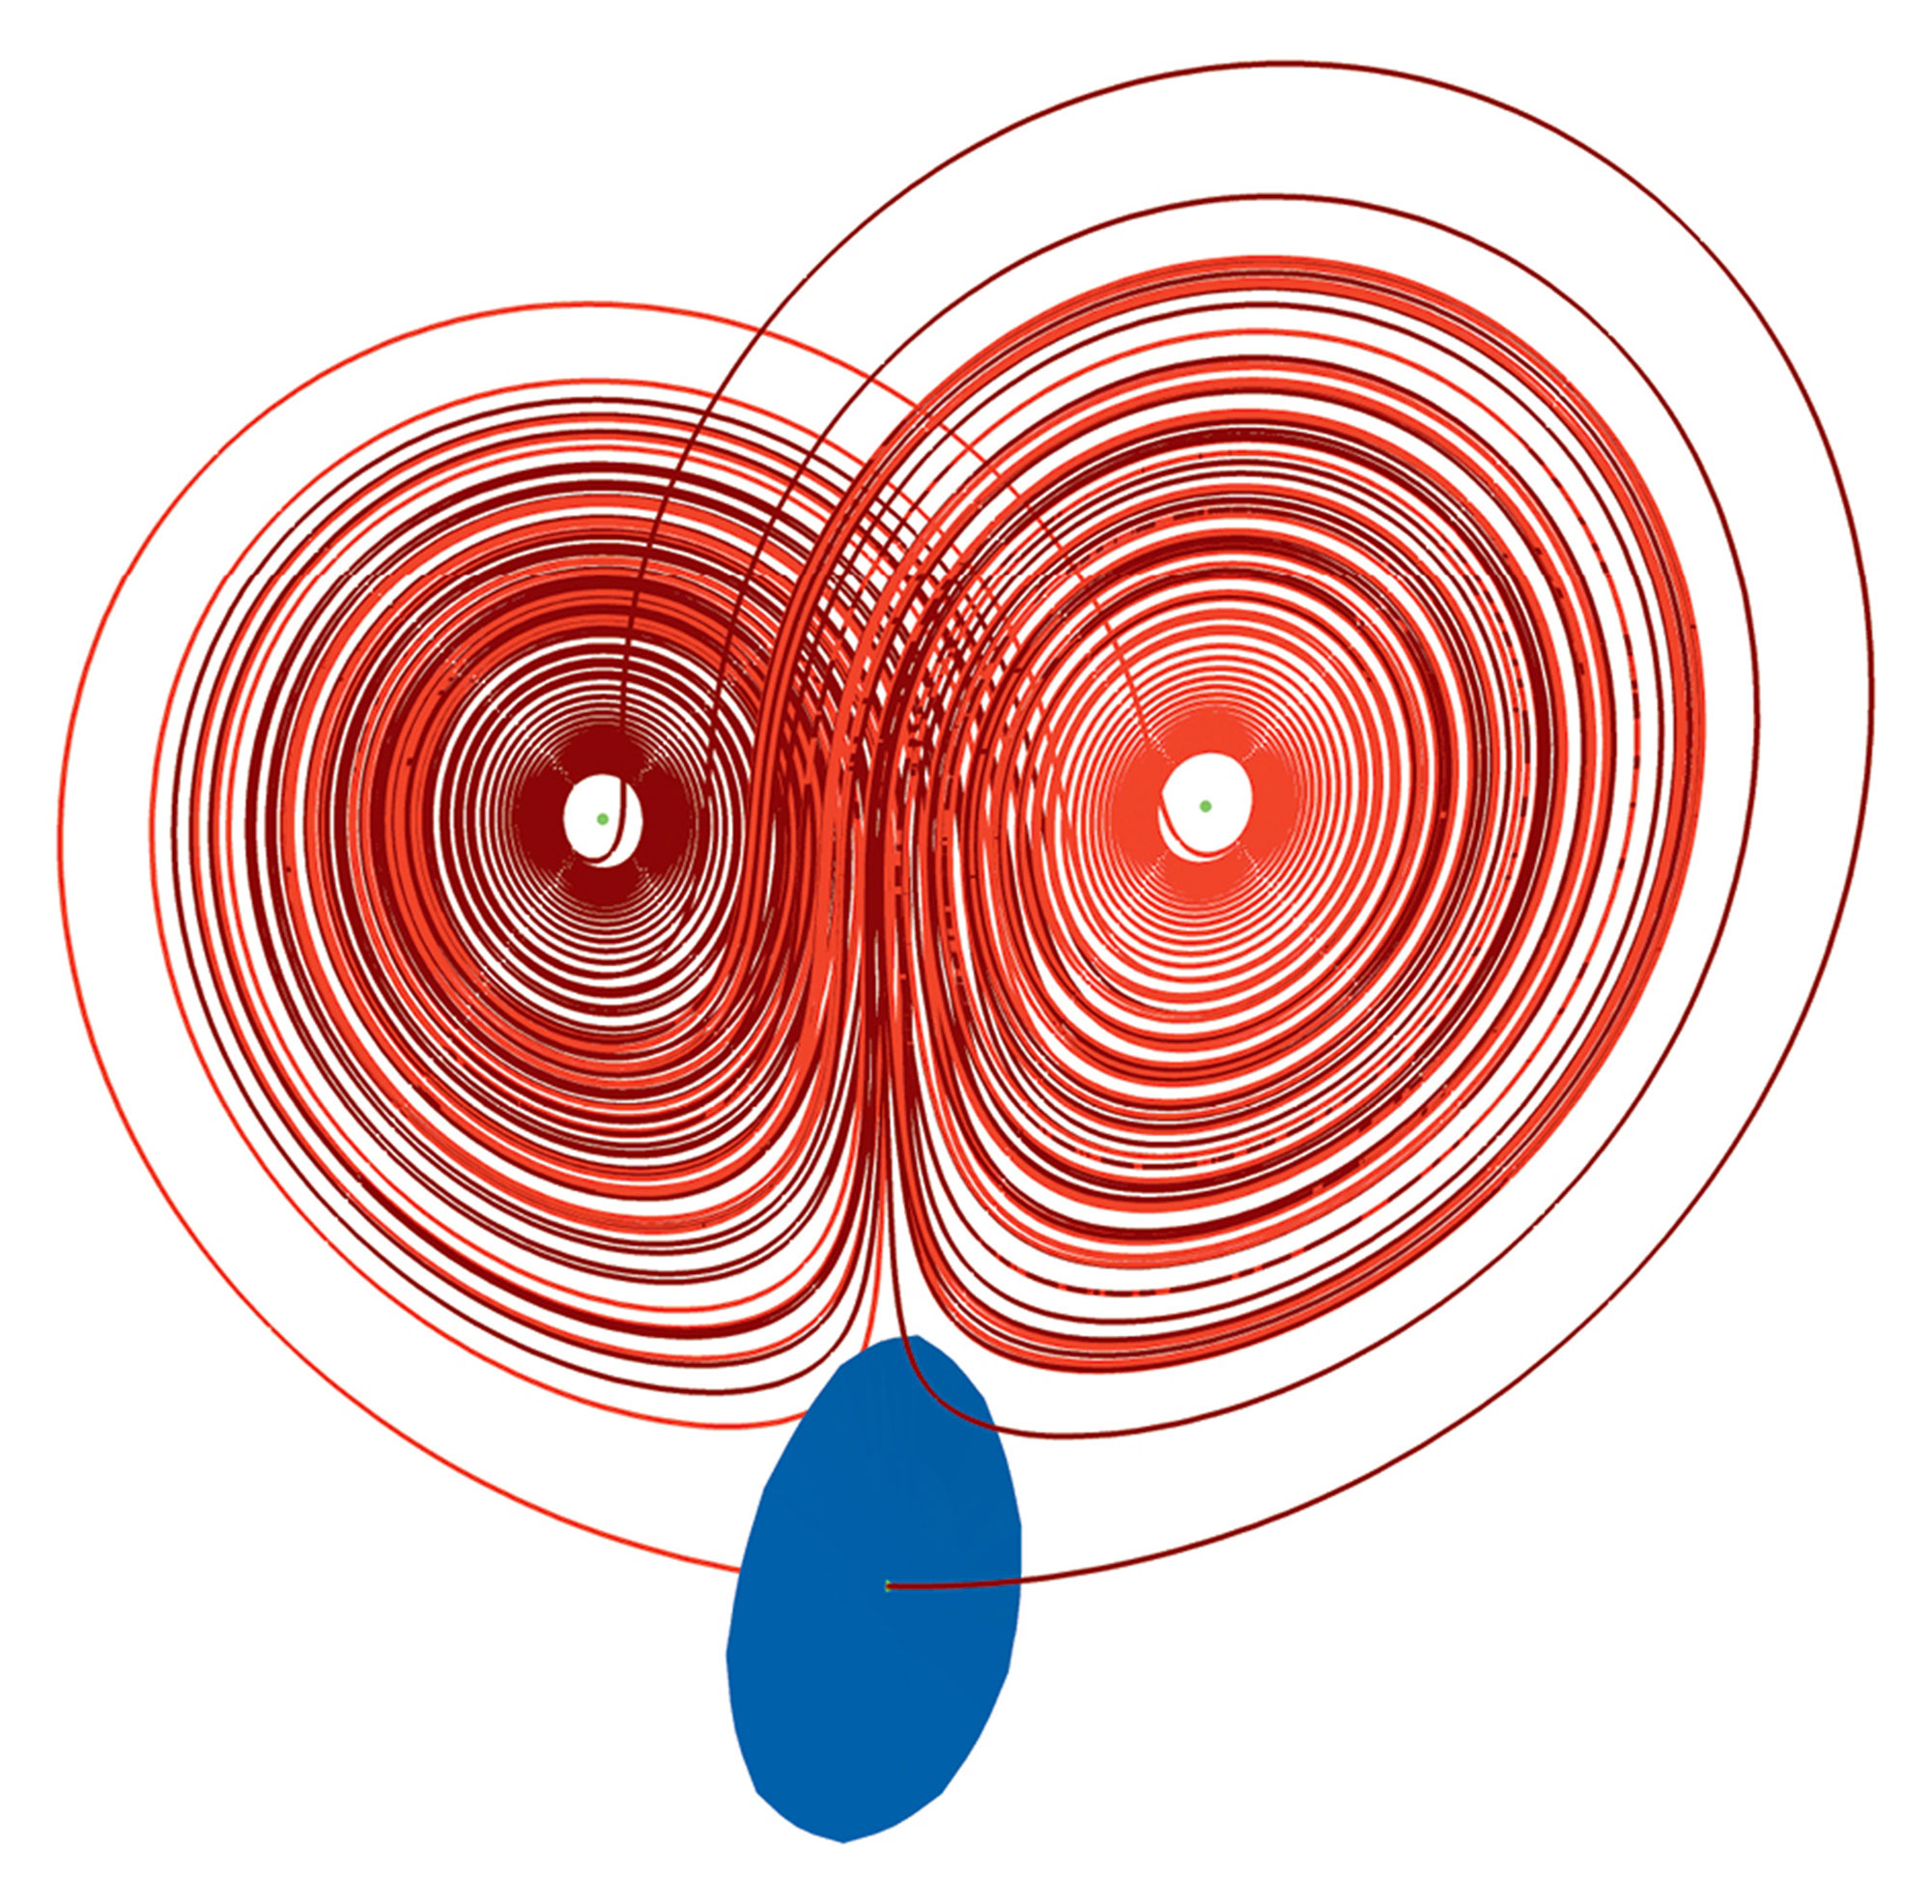 A representation of the Lorenz attractor using one-dimensional invariant manifolds of the origin.